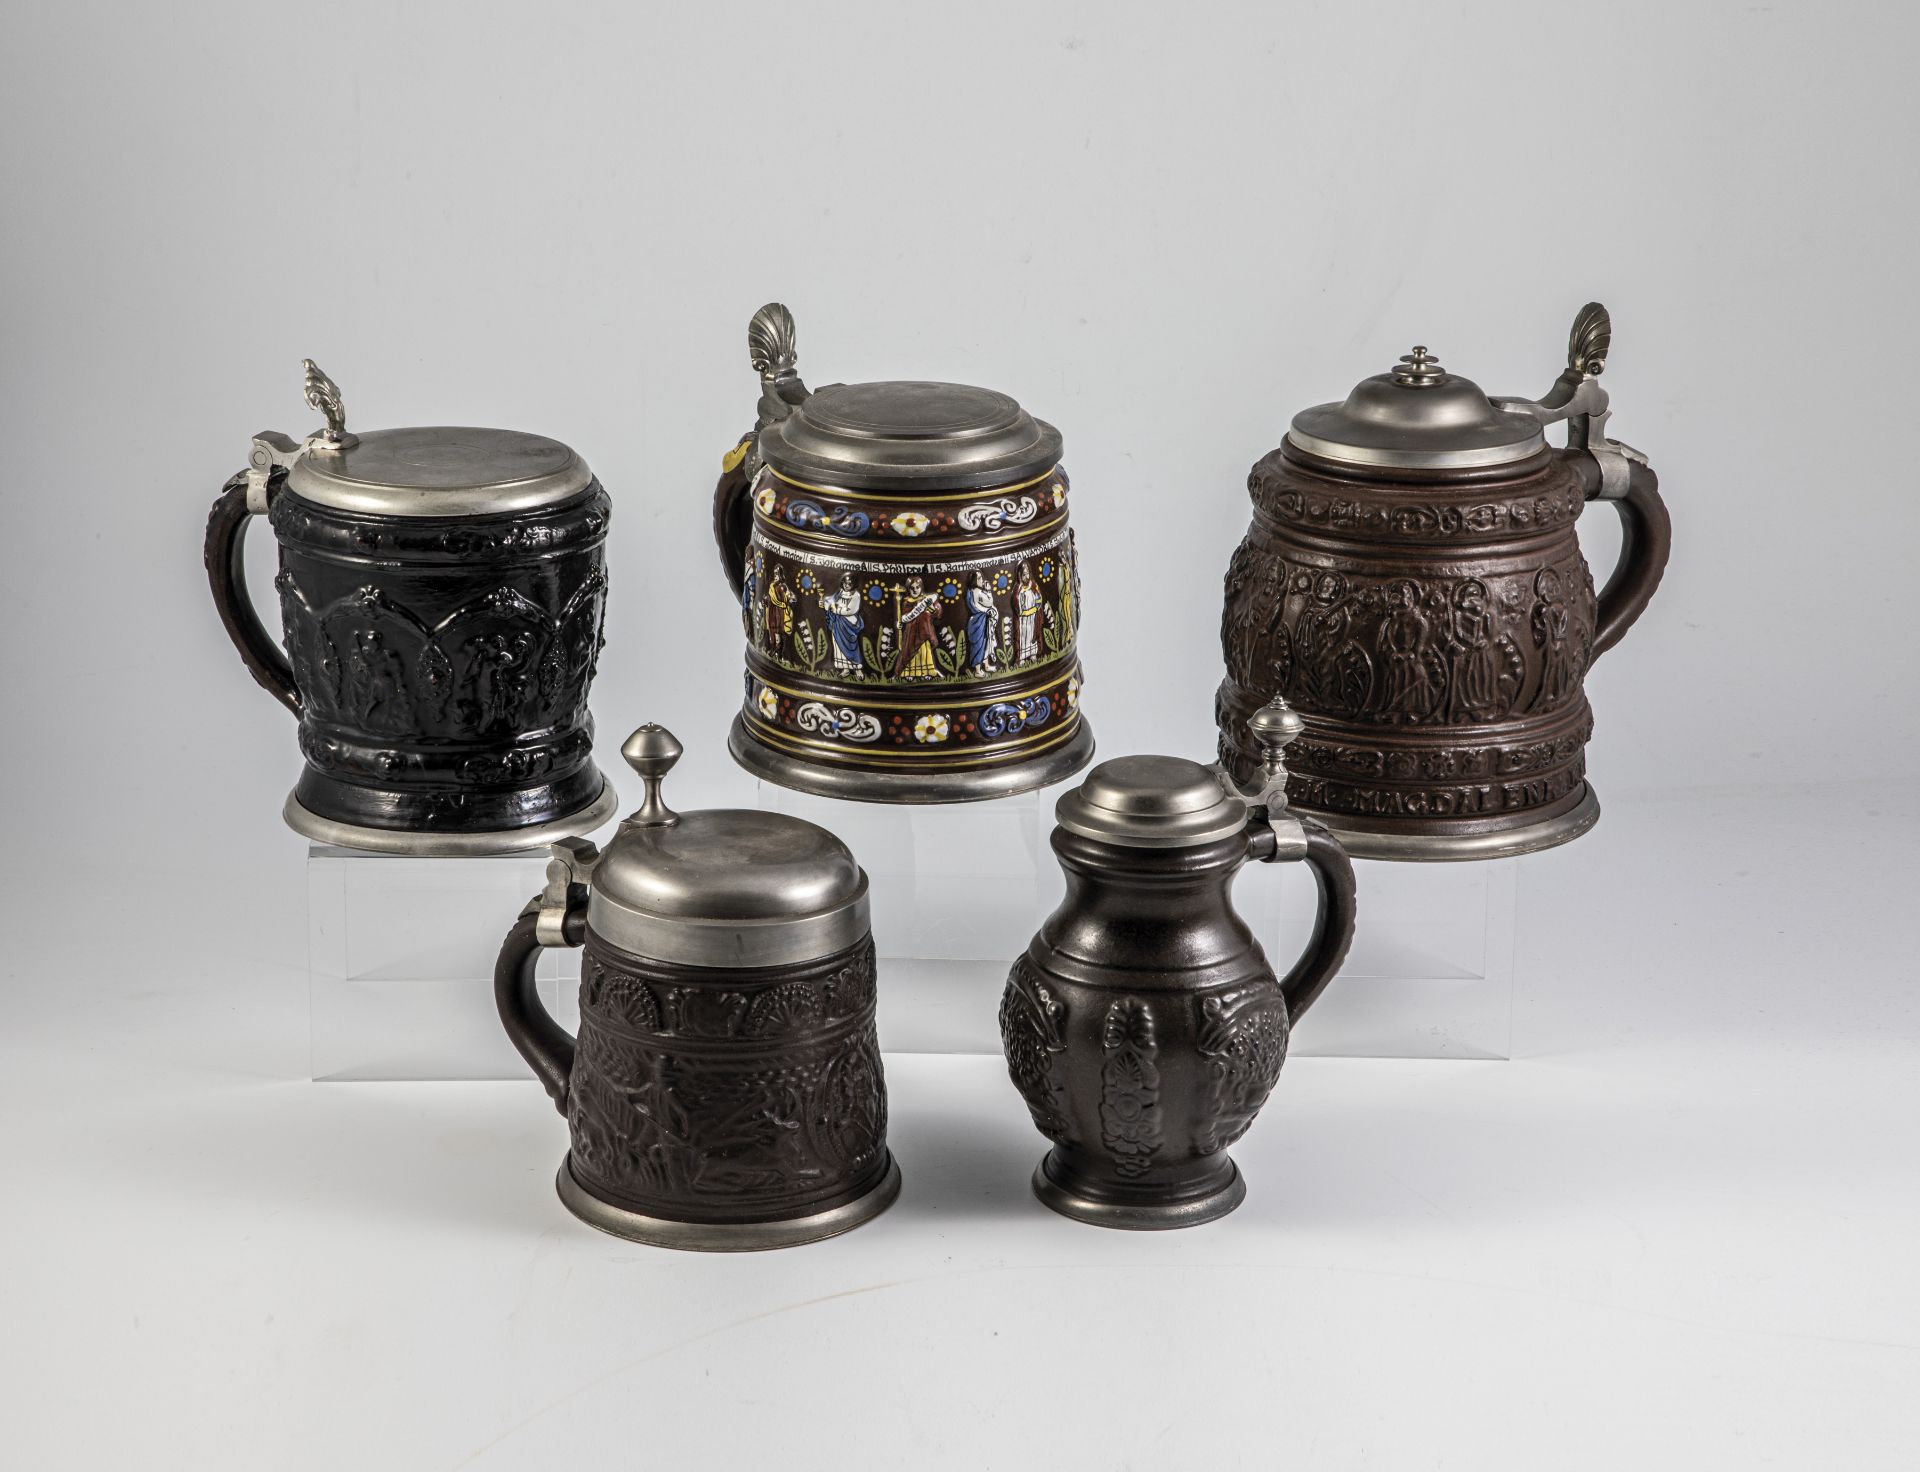 Five jugs with relief overlays